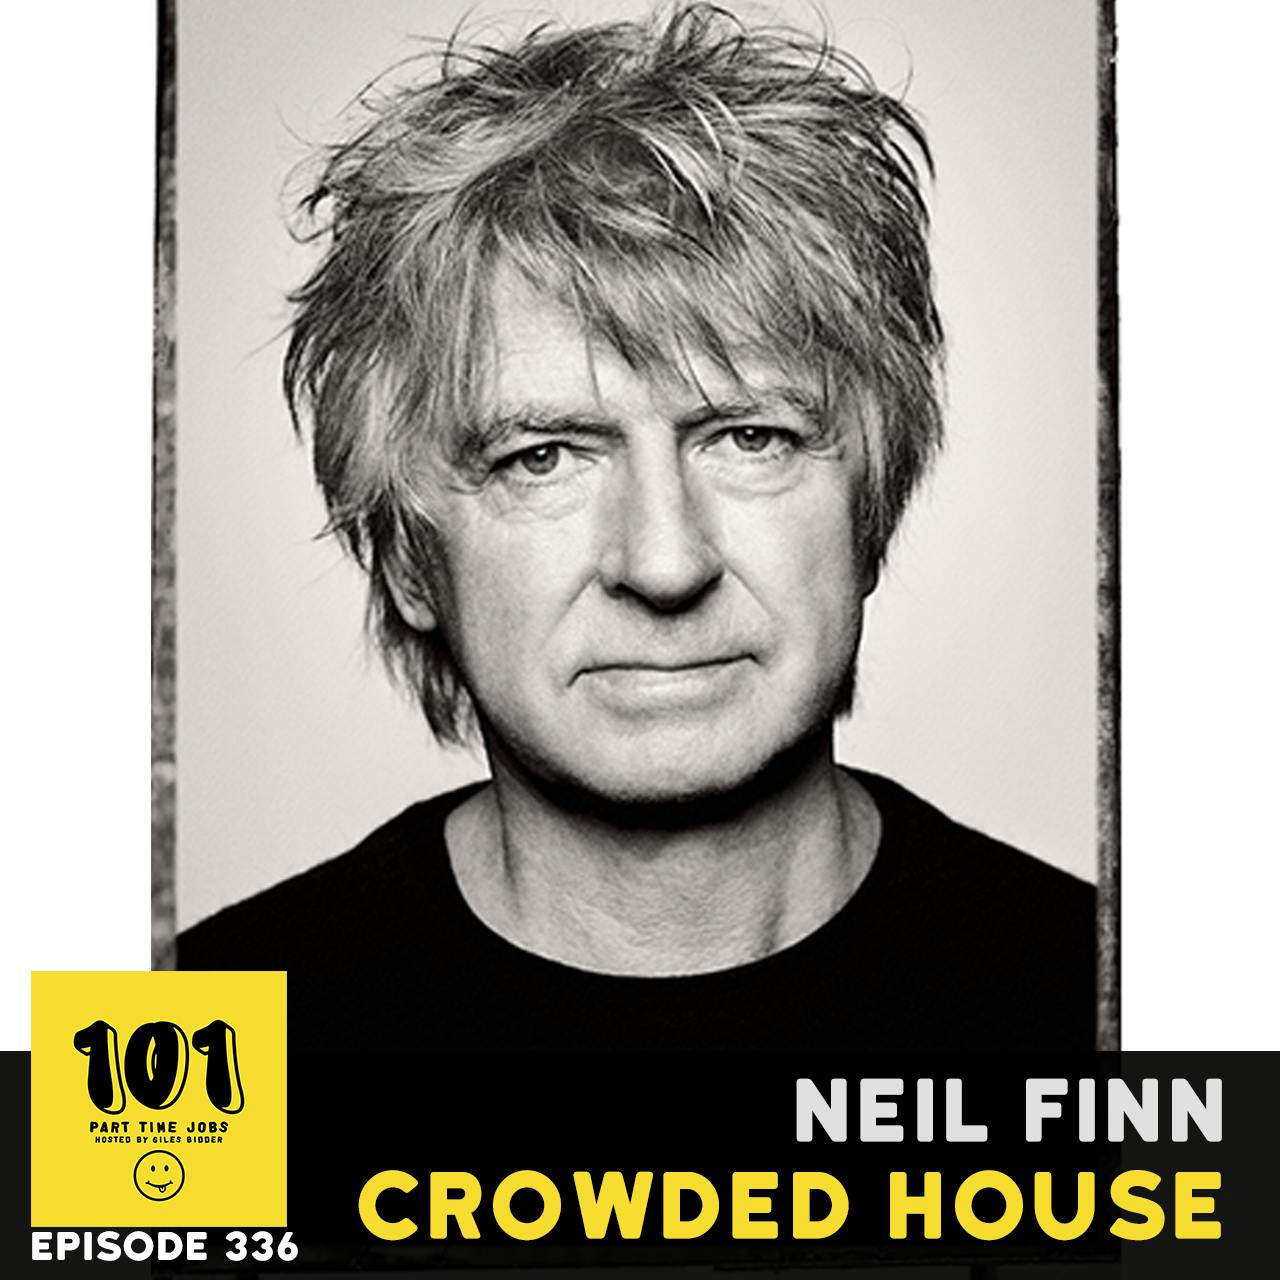 Neil Finn (Crowded House) - Fleetwood Mac and working at the morgue